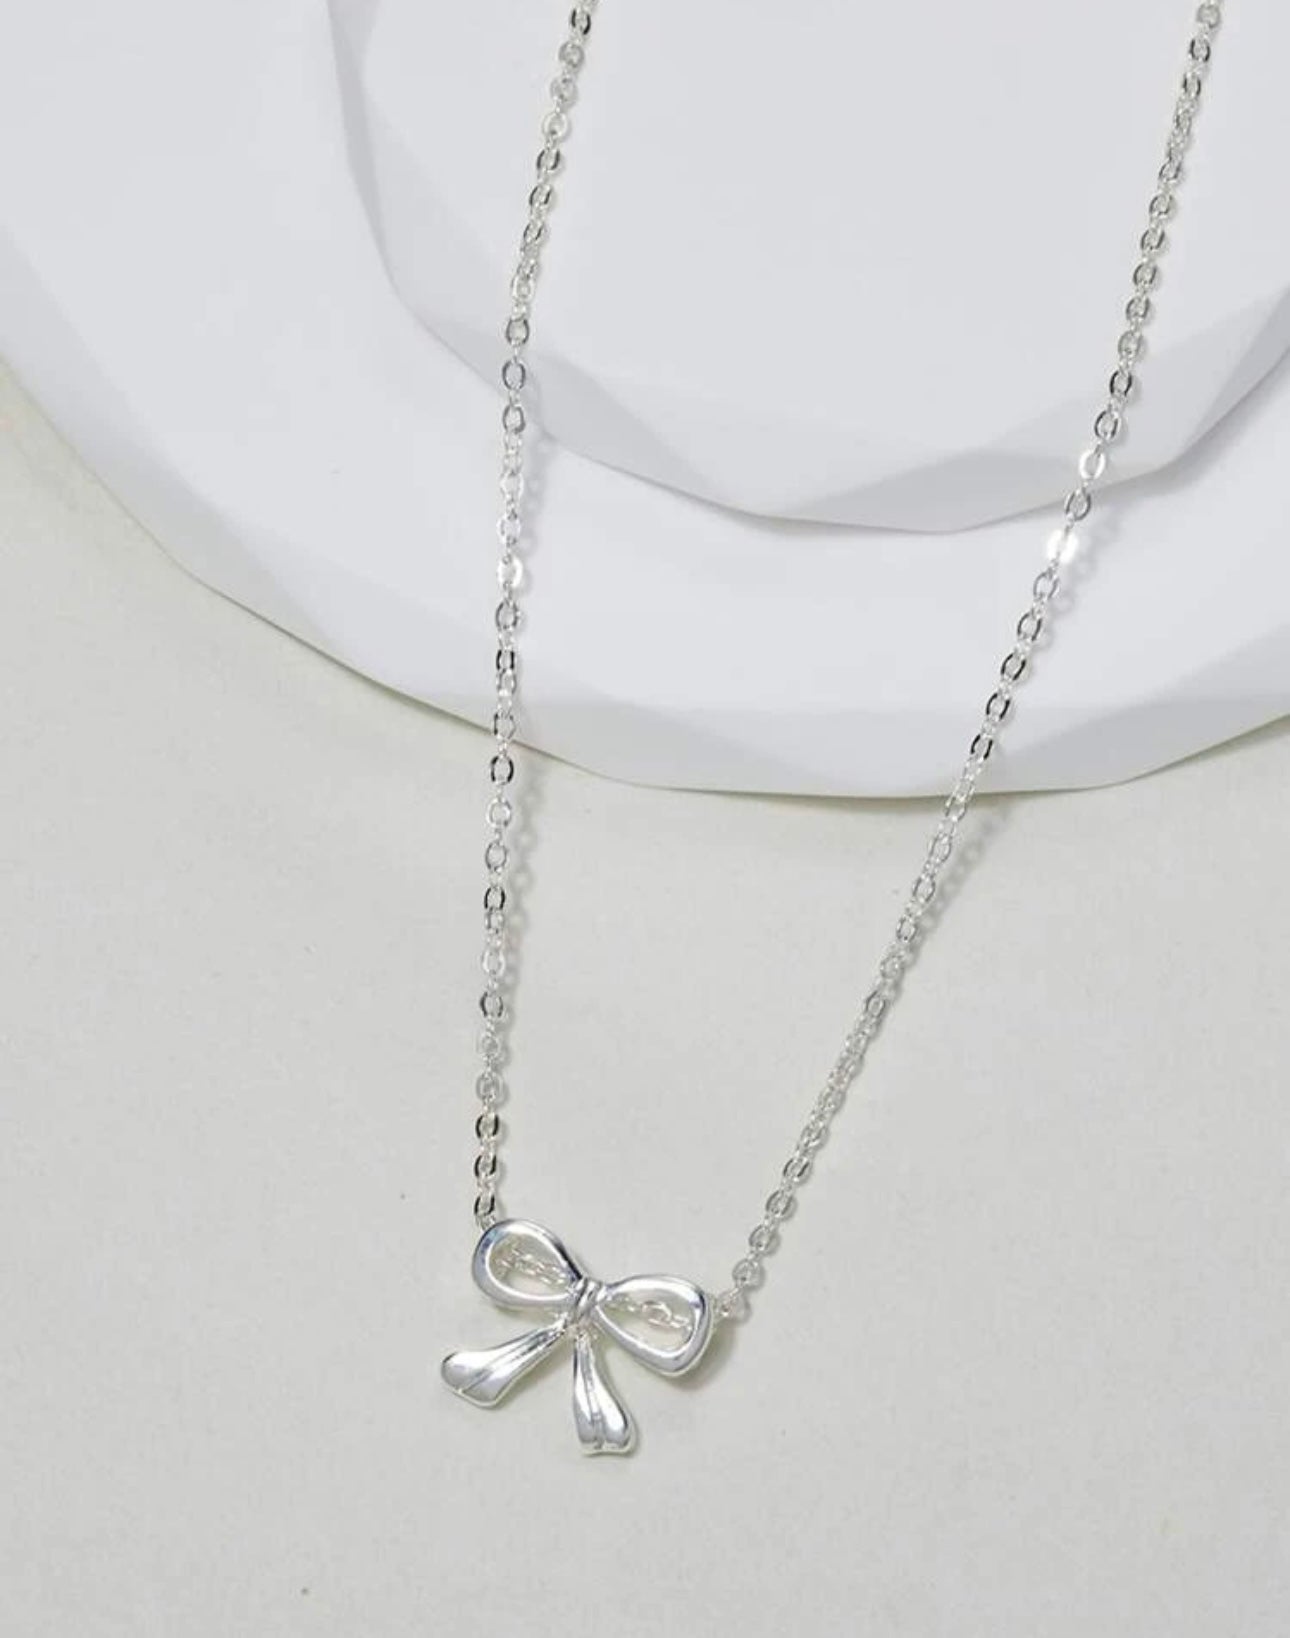 BOW CHARM NECKLACE